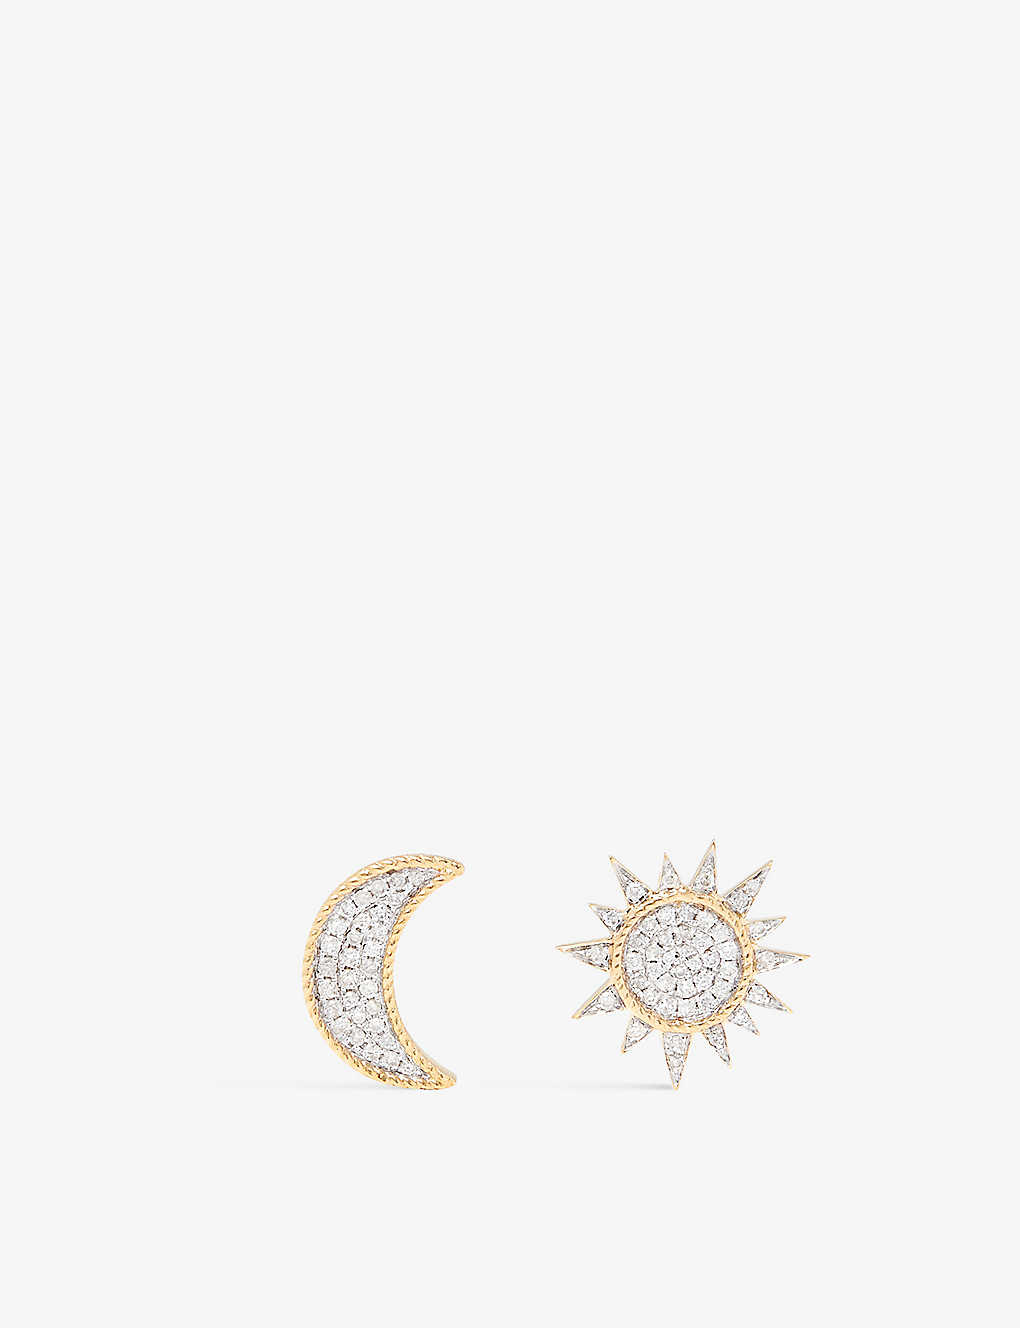 Yvonne Léon Yvonne Leon Womens 18k Yellow Gold Soleil And Lune 18ct Yellow-gold And 0.25ct Brilliant-cut Diamond